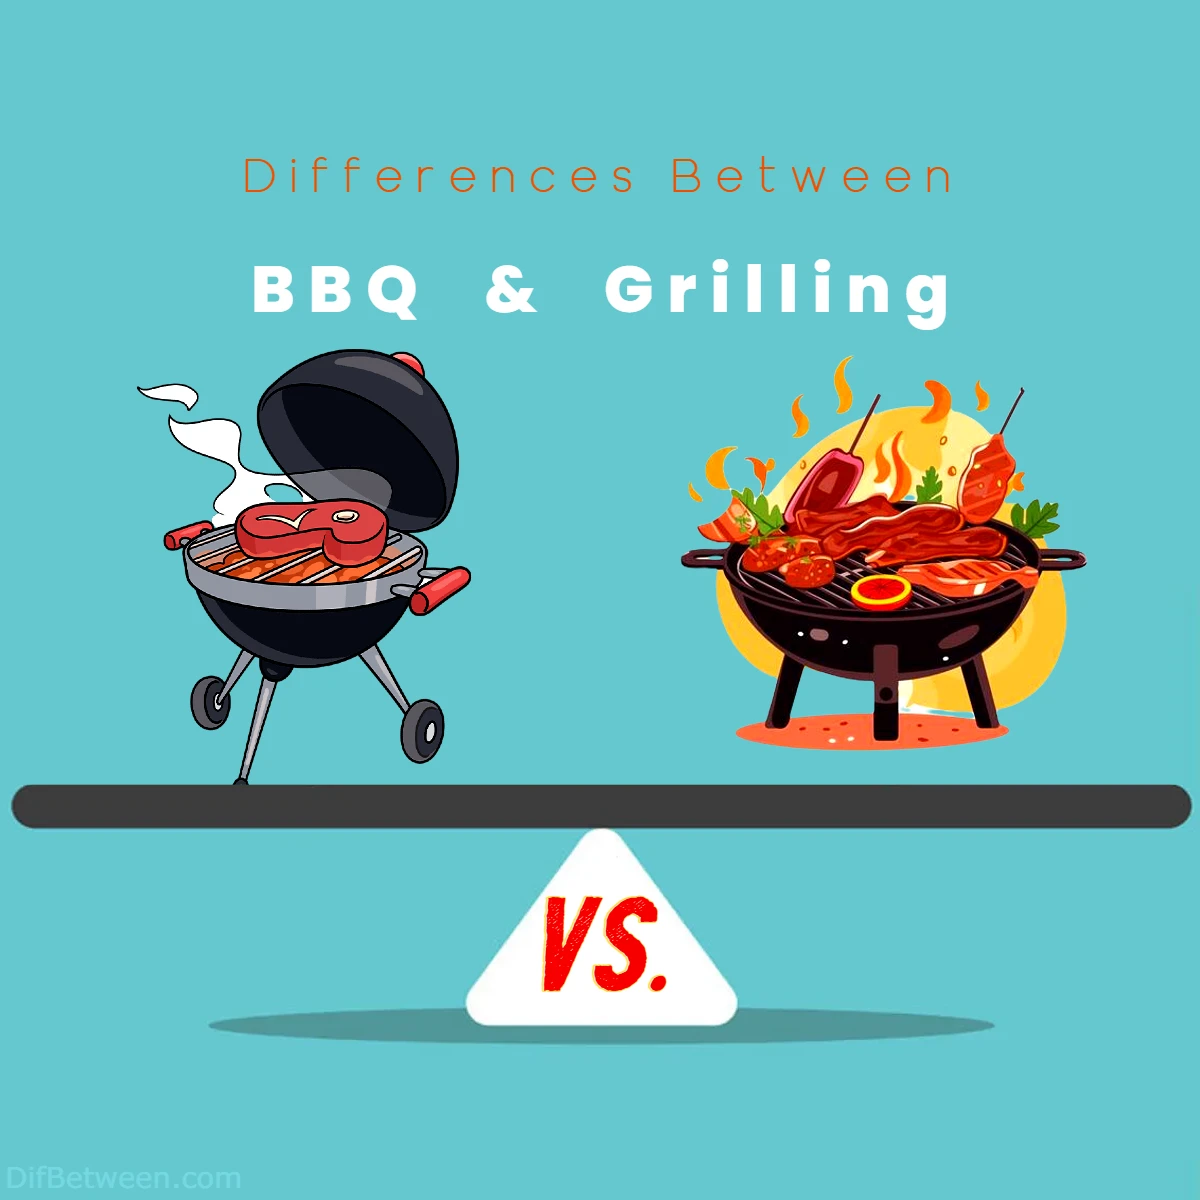 Differences Between BBQ vs Grilling